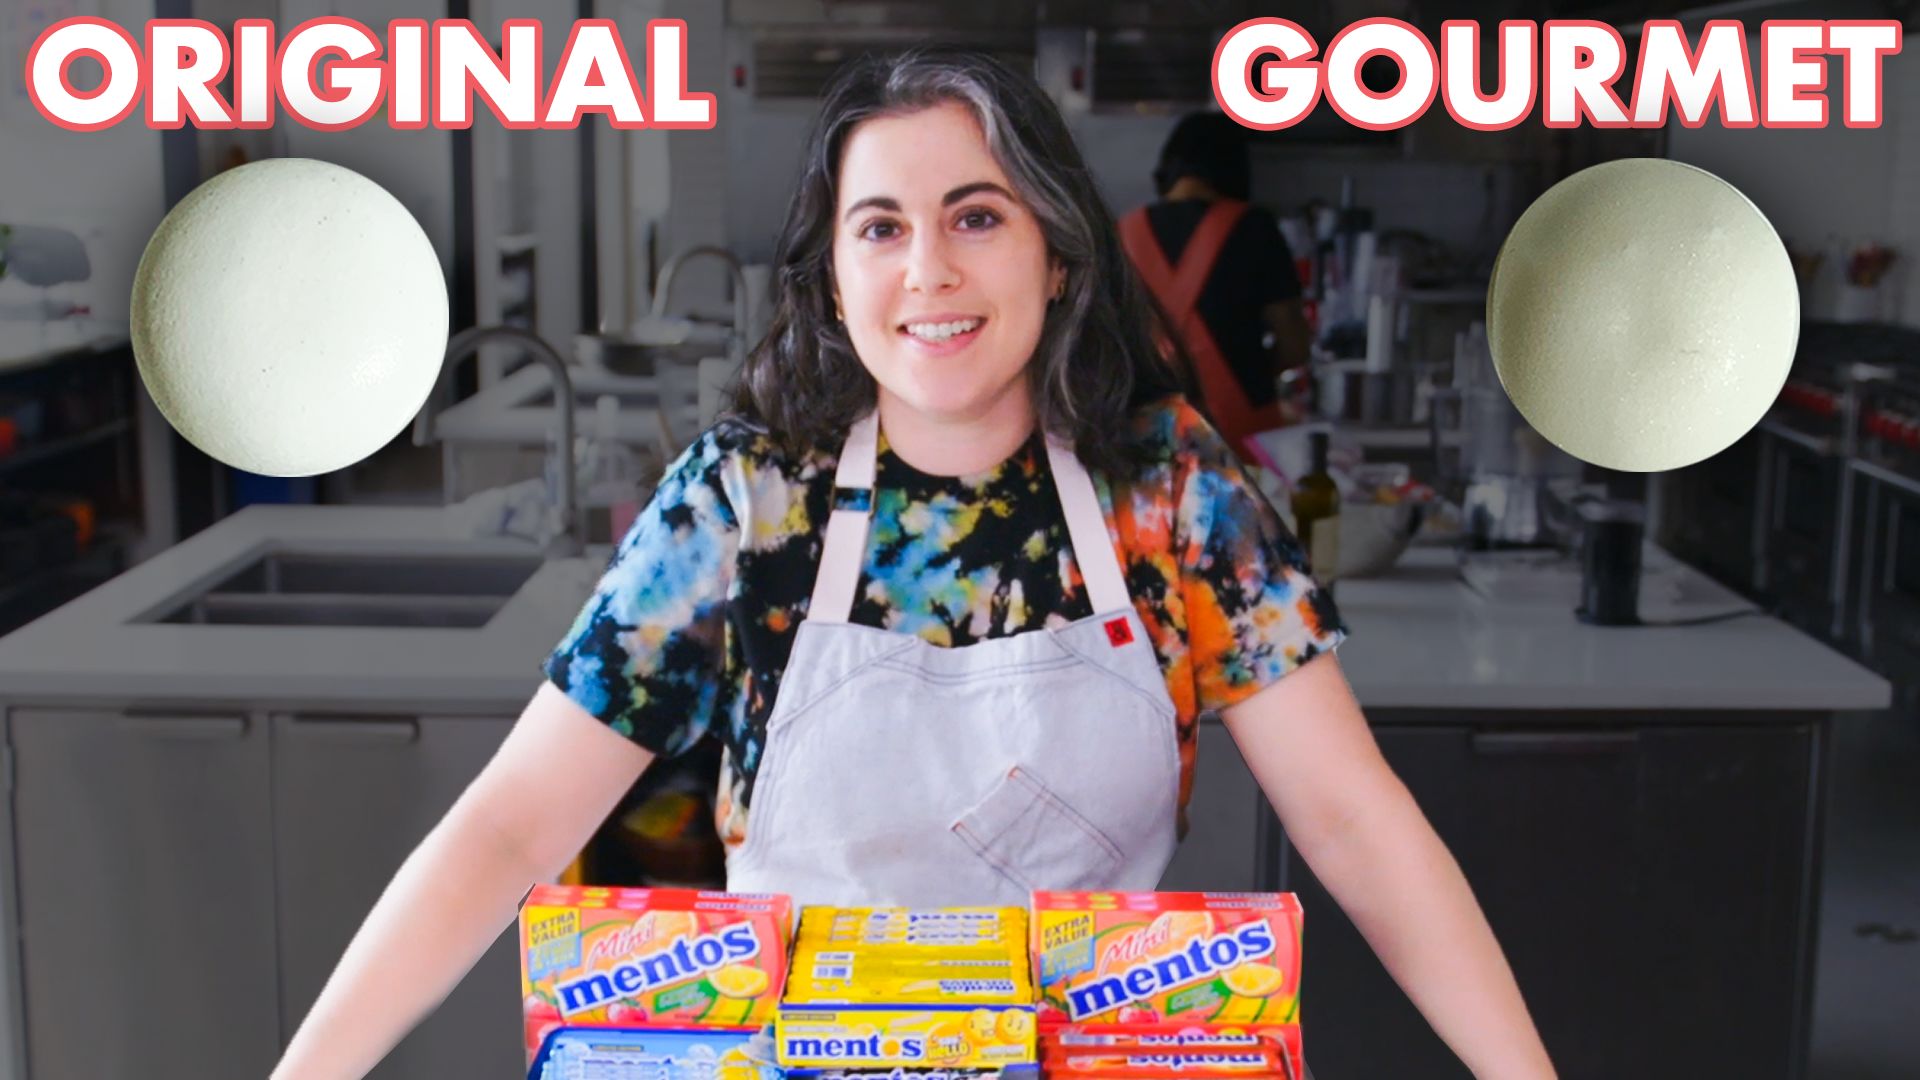 Watch Pastry Chef Attempts To Make Gourmet Mentos Gourmet Makes Bon